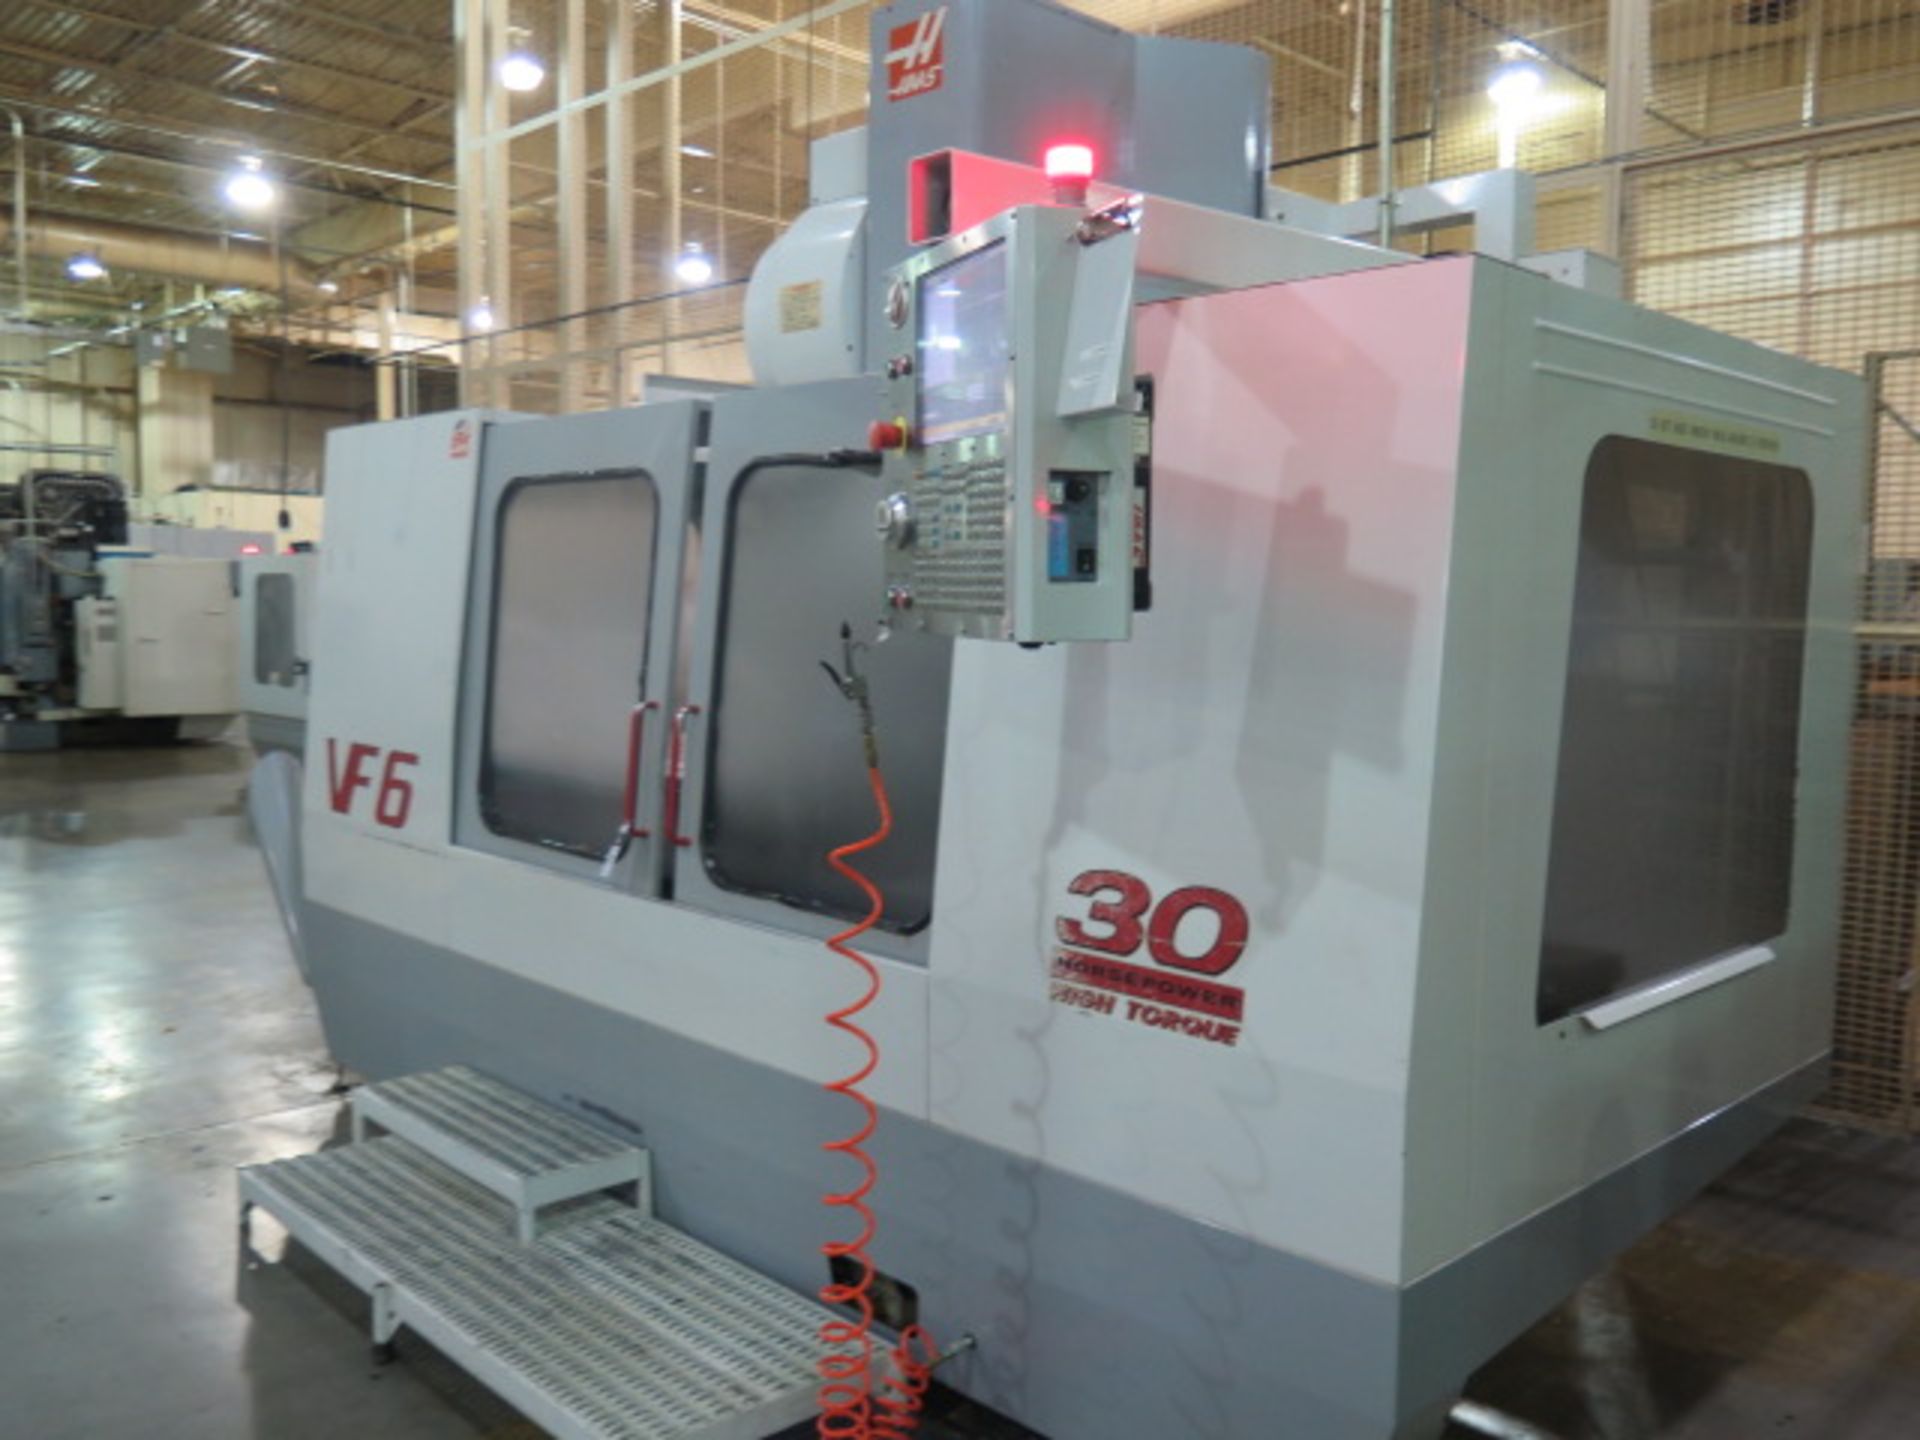 1999 Haas VF-6 CNC VMC s/n 18430 w/ Haas Controls, 24-Station Side Mount, Cat 40, SOLD AS IS - Image 3 of 15